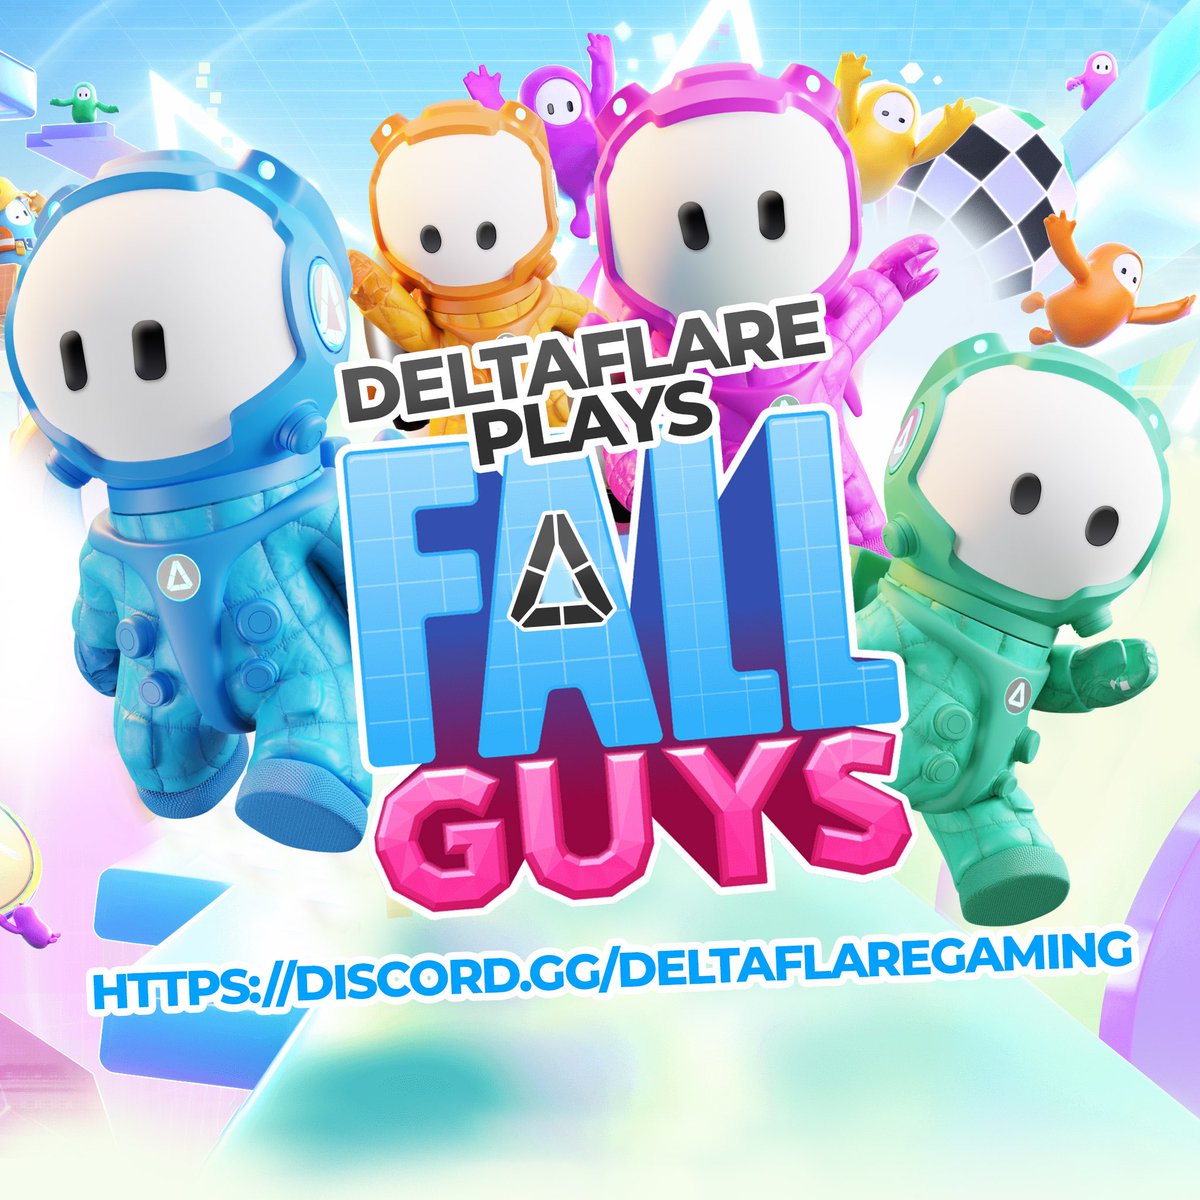 🚨ATTN: Deltians and other worldly Gamers Join us for our monthly gaming tournament as we get goofy with @FallGuysGame❗️ Registration is open NOW 👇🏽 Where: discord.gg/vGRDcqYX8R When: Apr 13 @ 9am PST/12pm EST Registration Fee: FREE 💸 🏆 Prizes Every Round 🏆